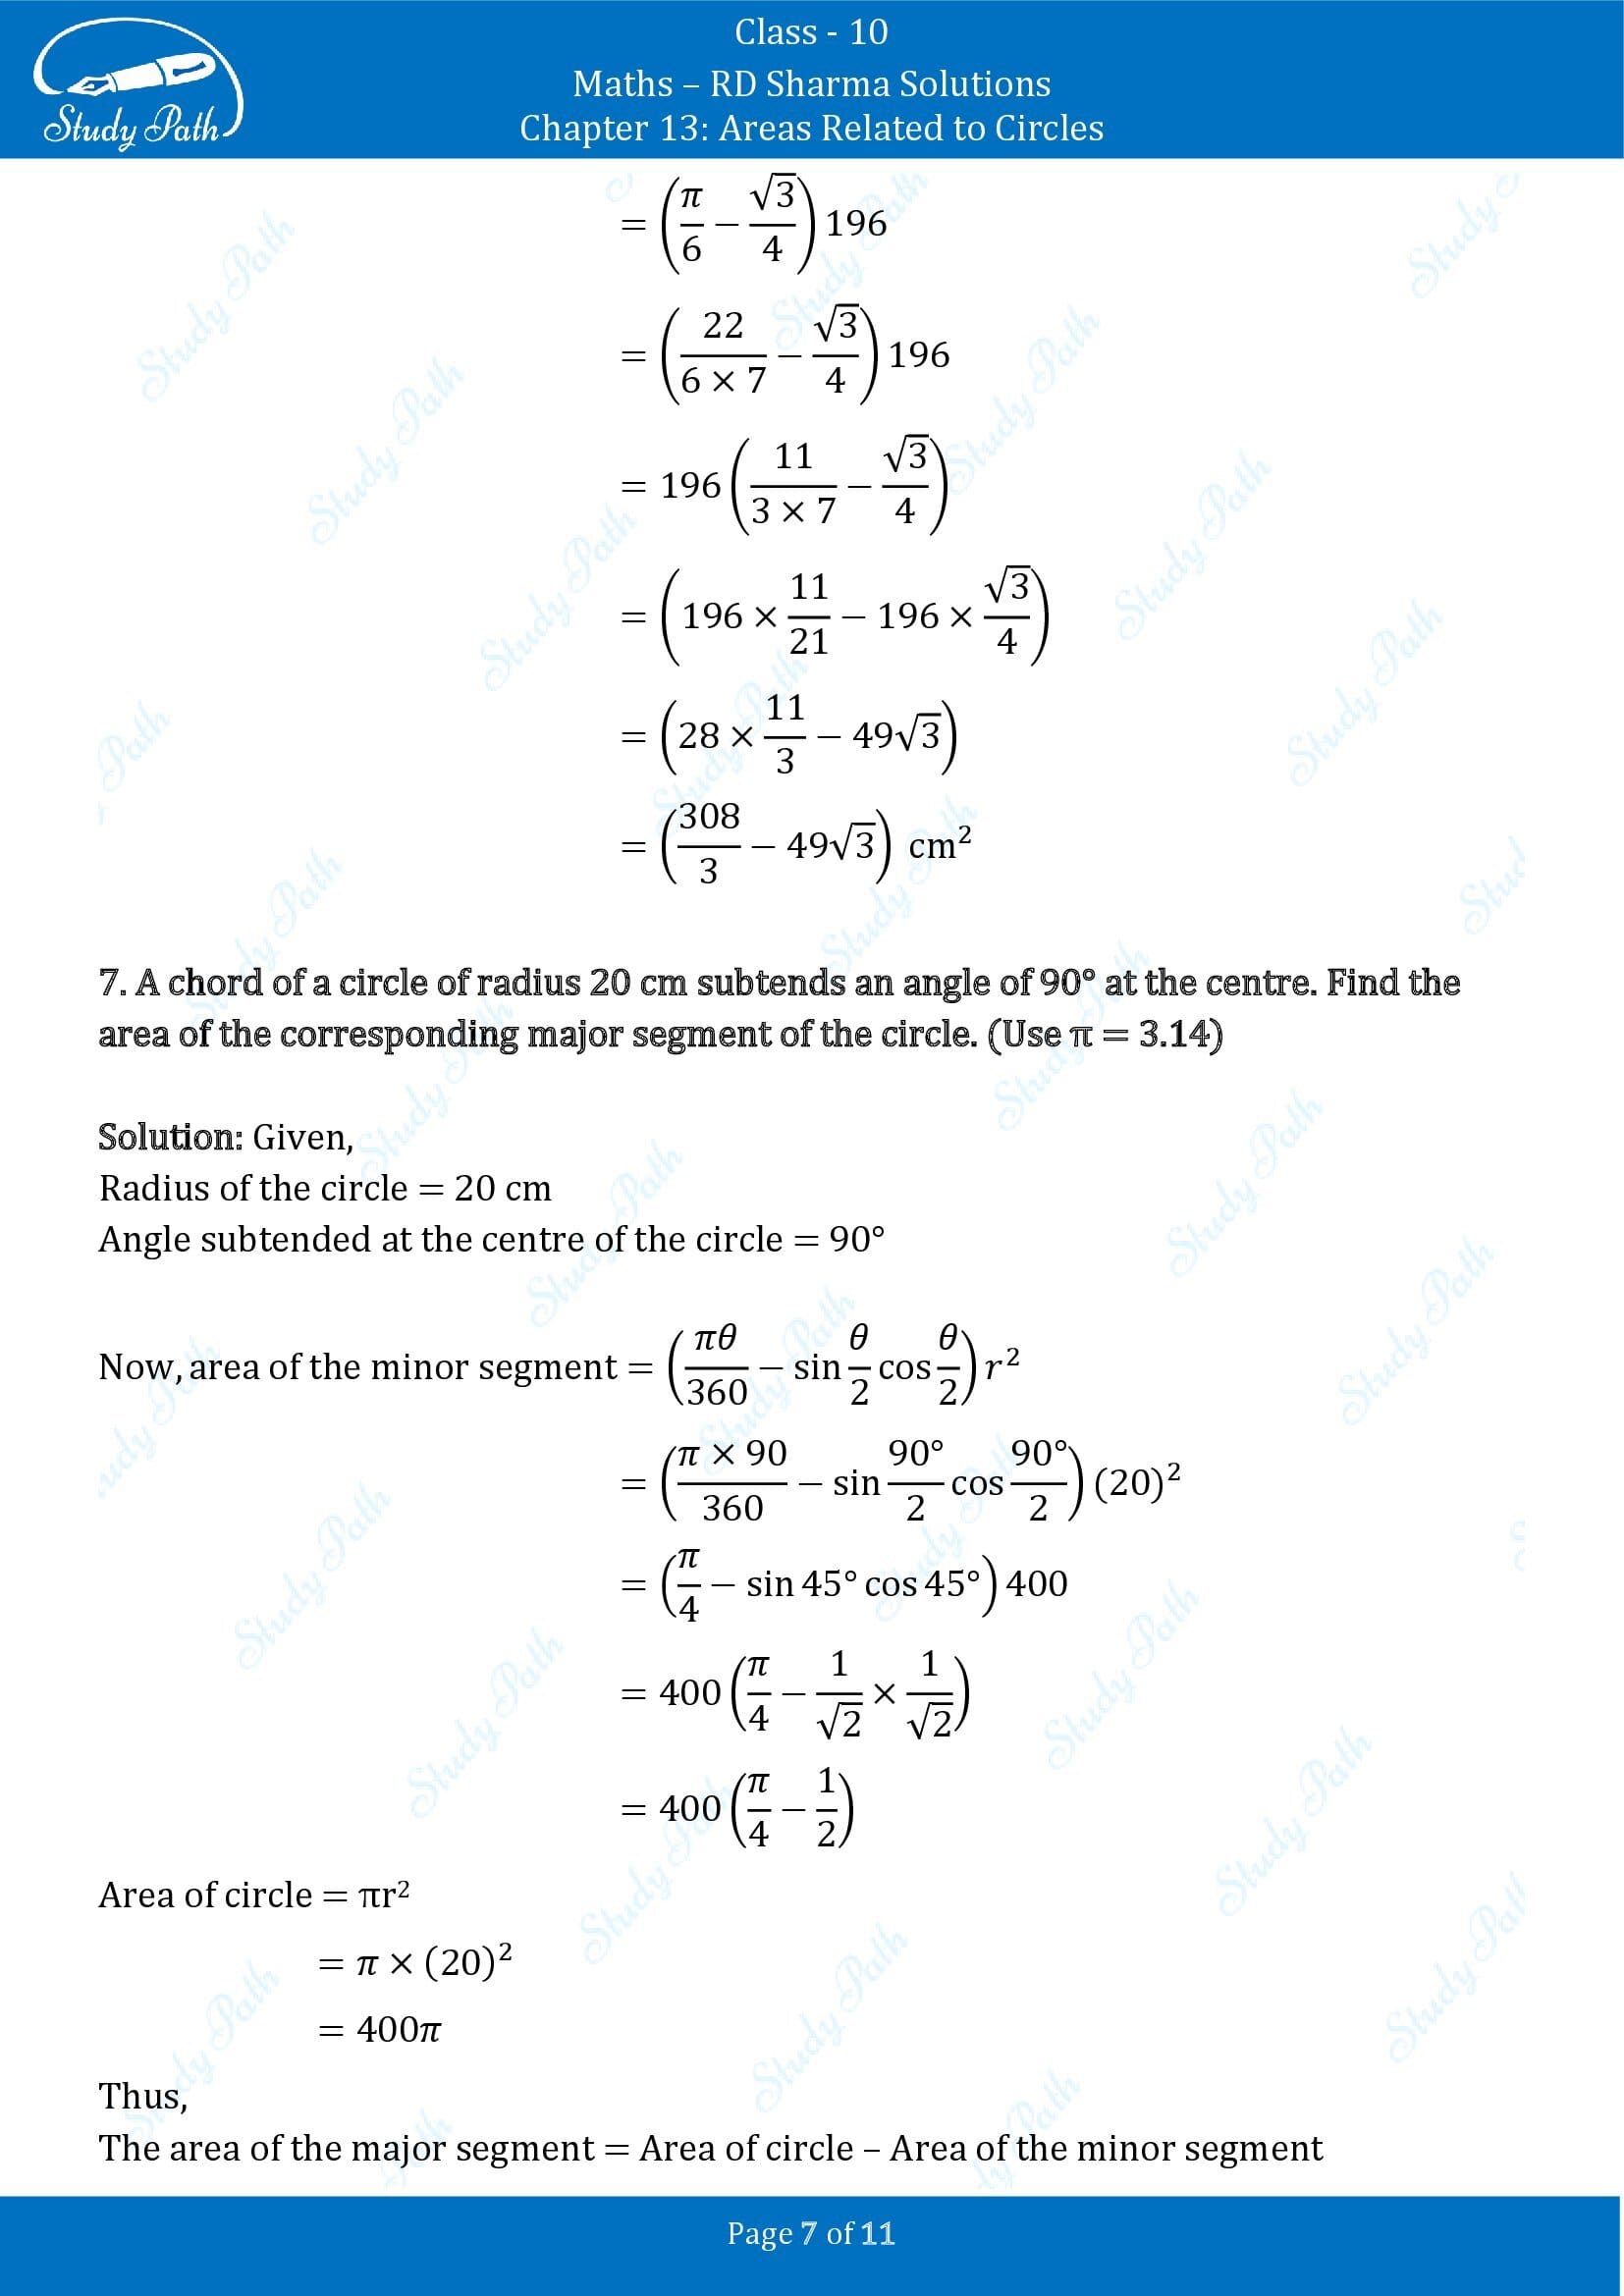 RD Sharma Solutions Class 10 Chapter 13 Areas Related to Circles Exercise 13.3 00007